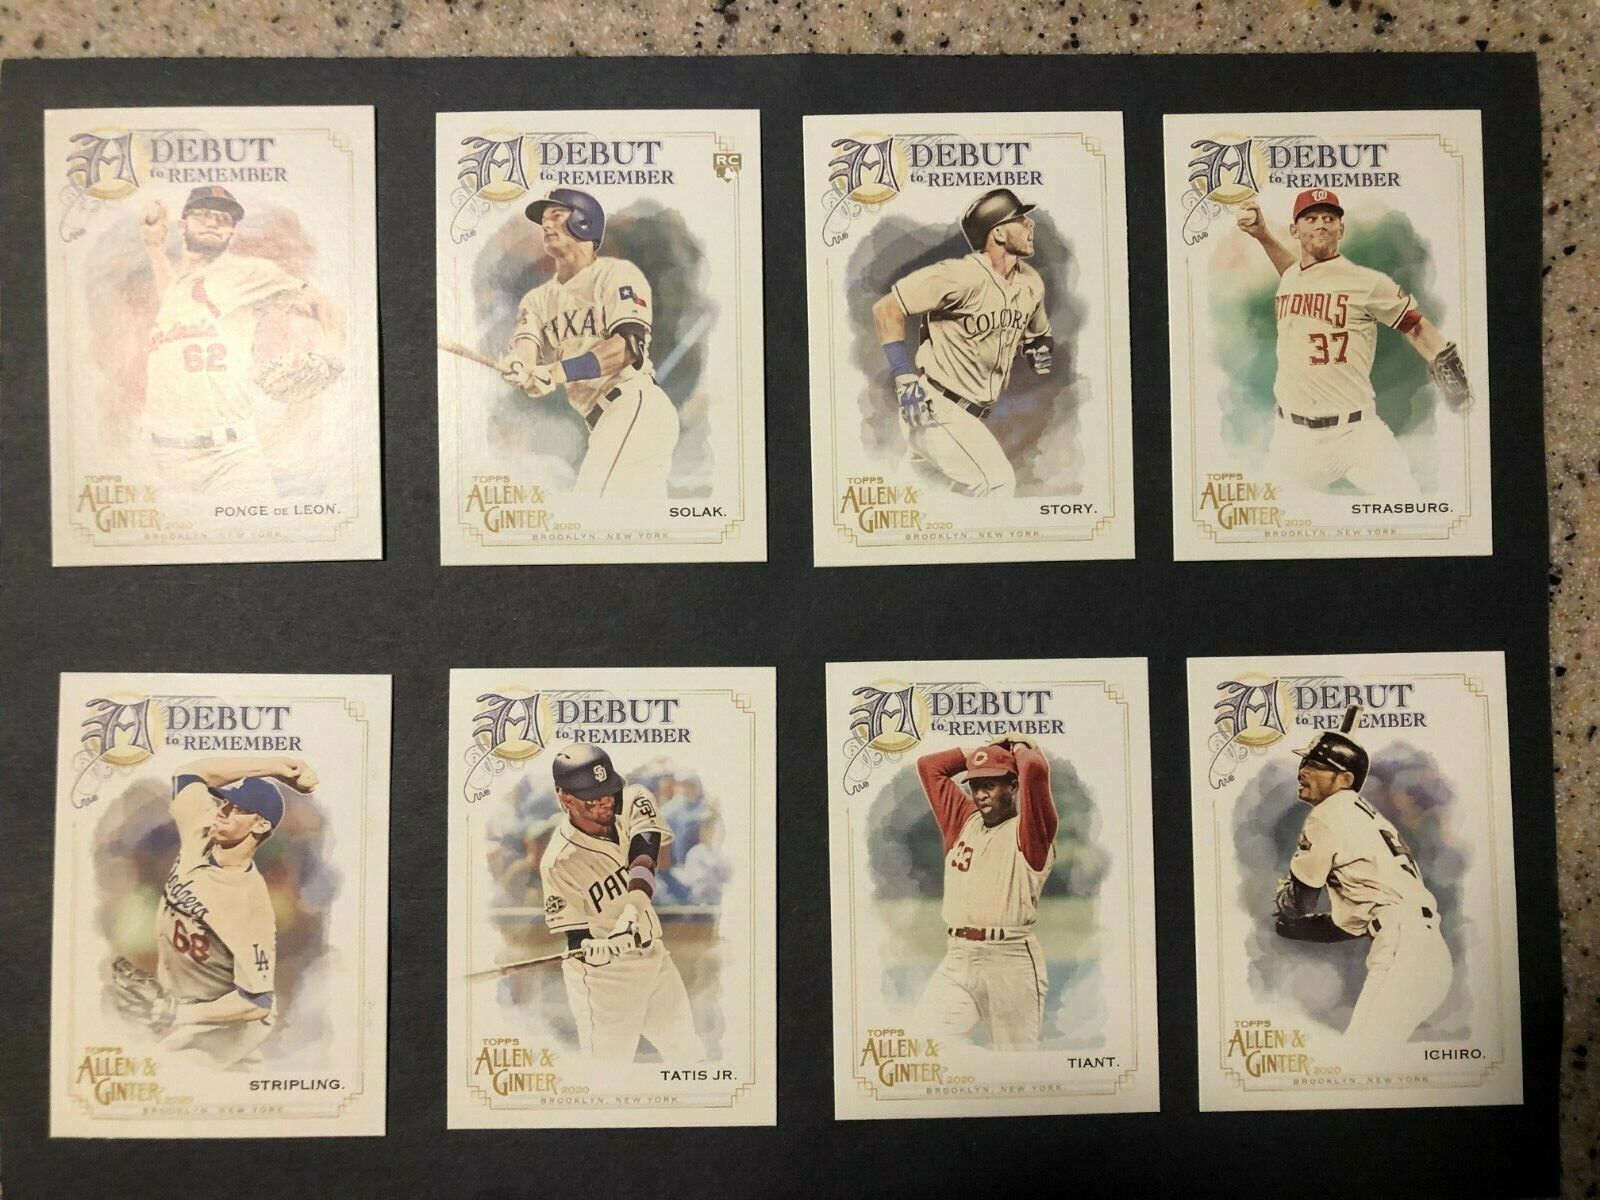 2020 TOPPS ALLEN & GINTER BASEBALL A DEBUT TO REMEMBER INSERTS YOU CHOOSE CARD